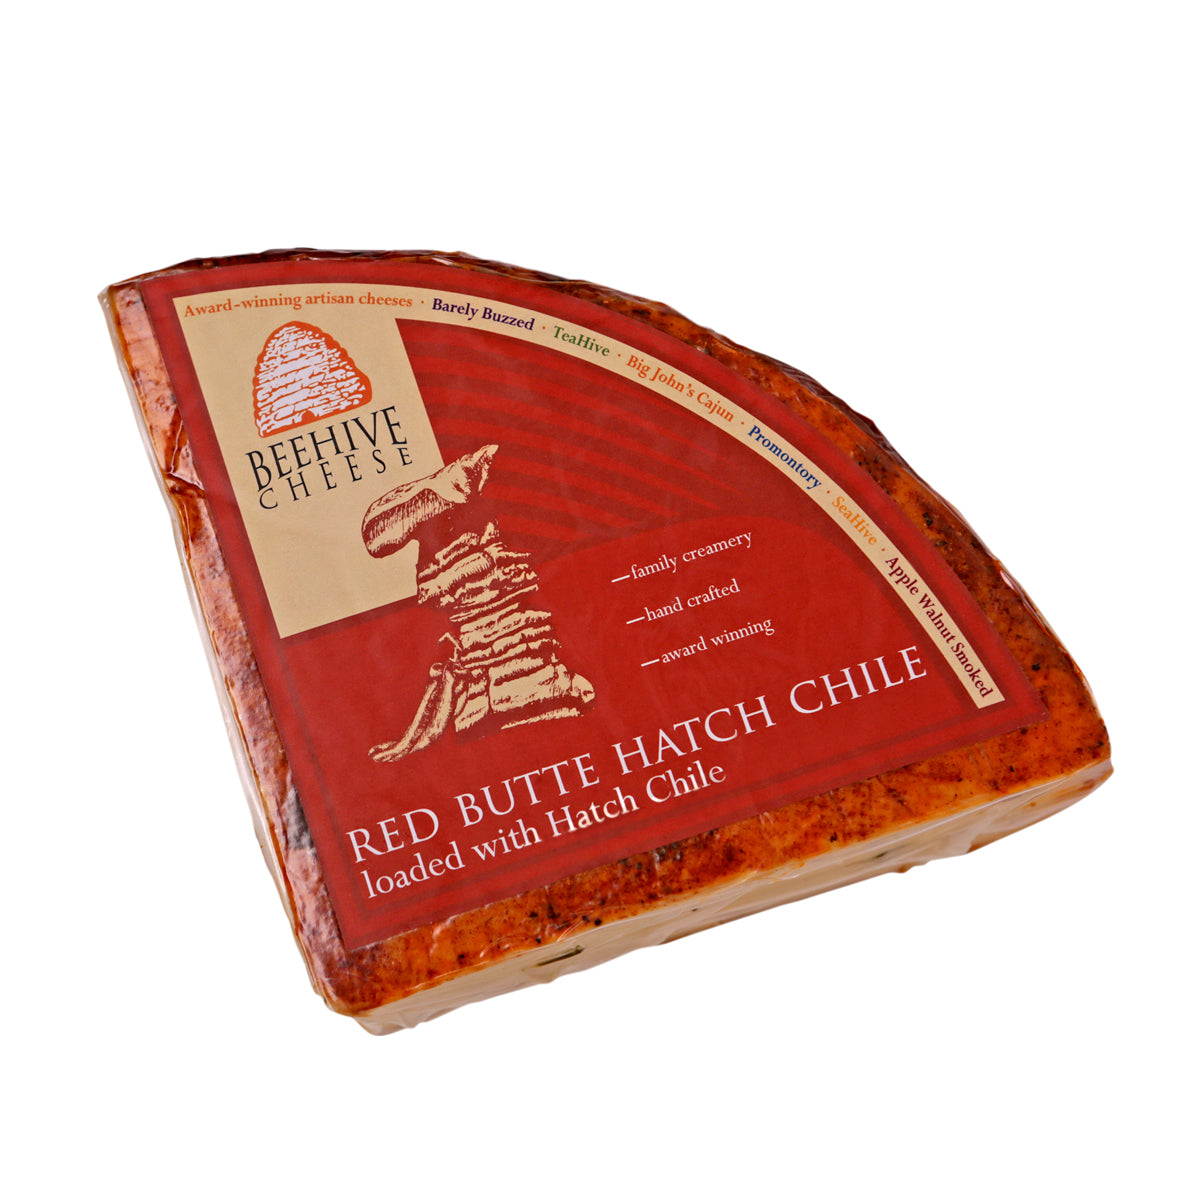 Beehive Cheese Red Butte Hatch Chile Cheese Quarter Wheel